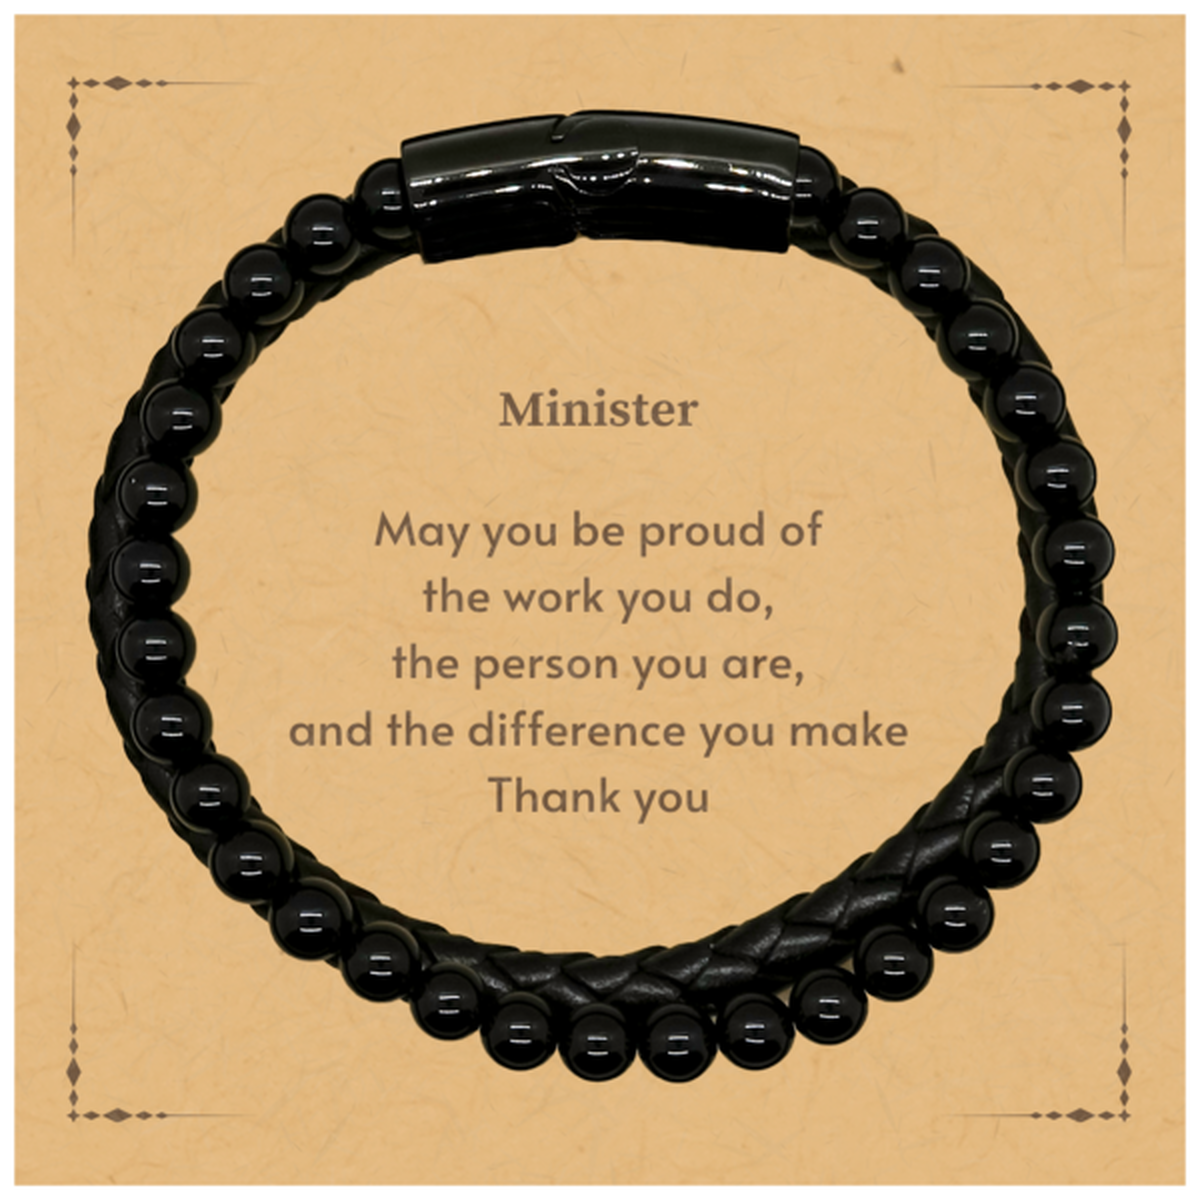 Heartwarming Stone Leather Bracelets Retirement Coworkers Gifts for Minister, Minister May You be proud of the work you do, the person you are Gifts for Boss Men Women Friends